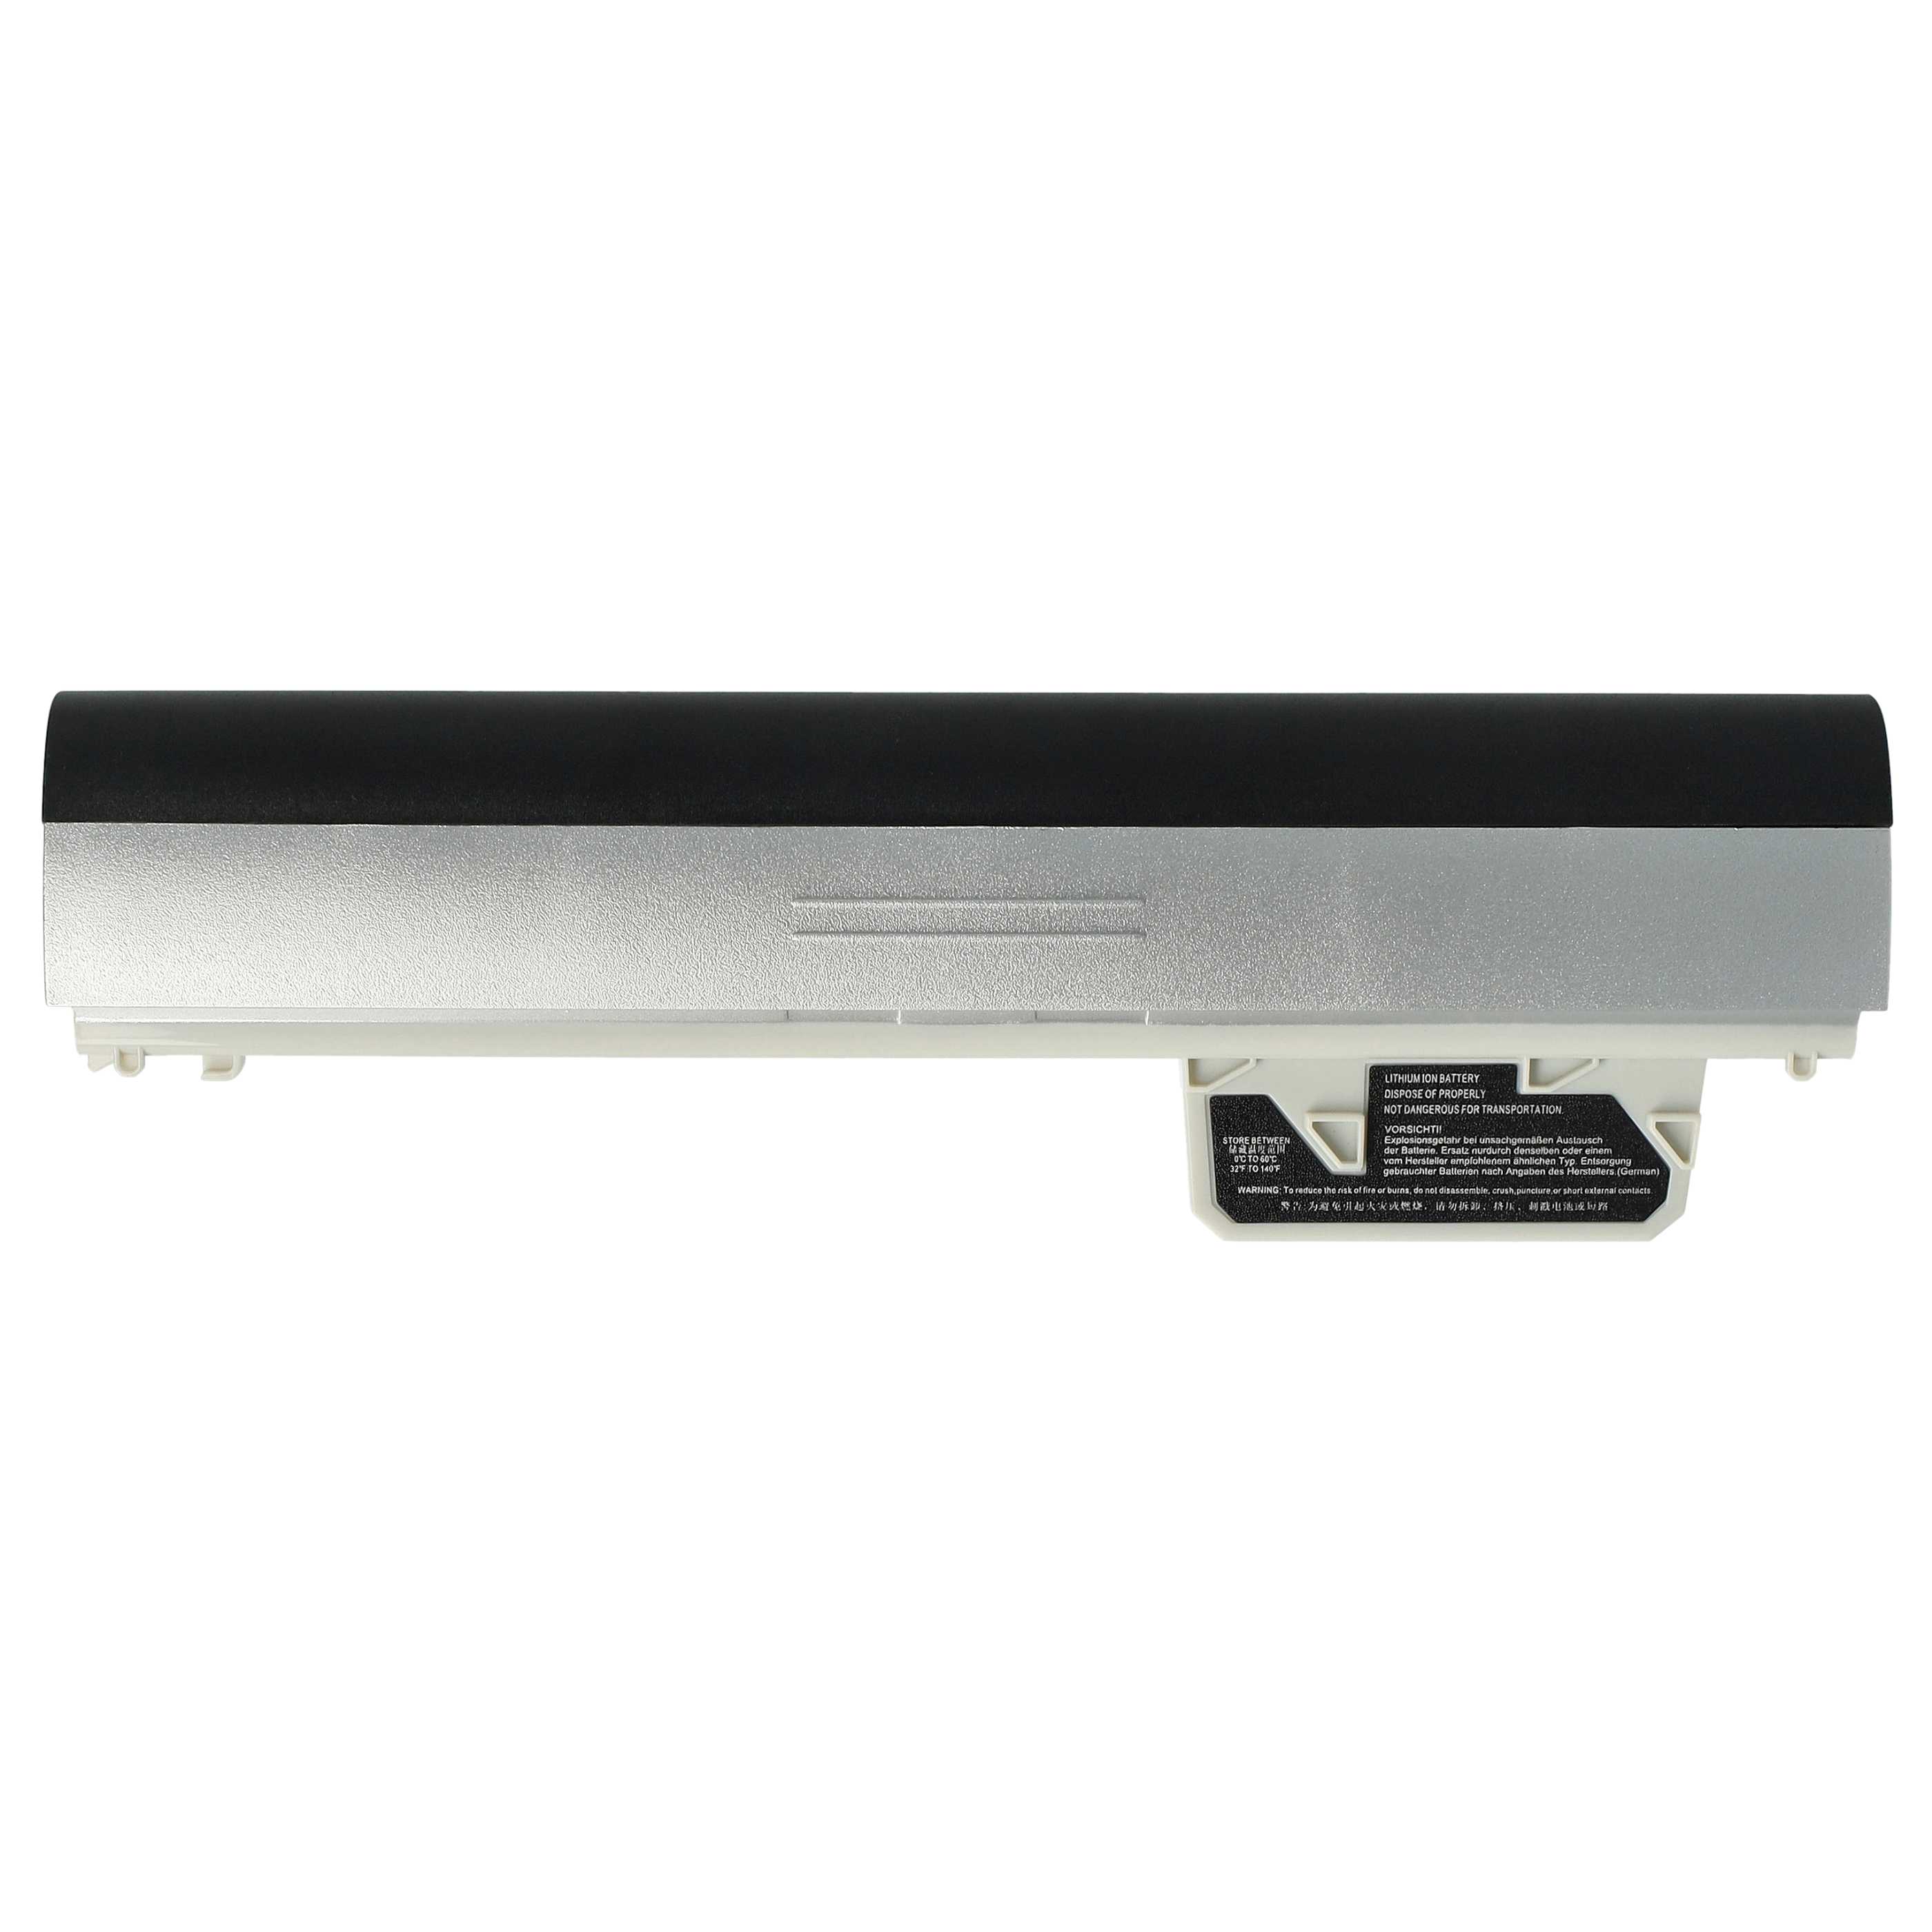 Notebook Battery Replacement for HP 628419-001, 626869-851, 626869-321 - 4400mAh 11.1V Li-Ion, silver-grey